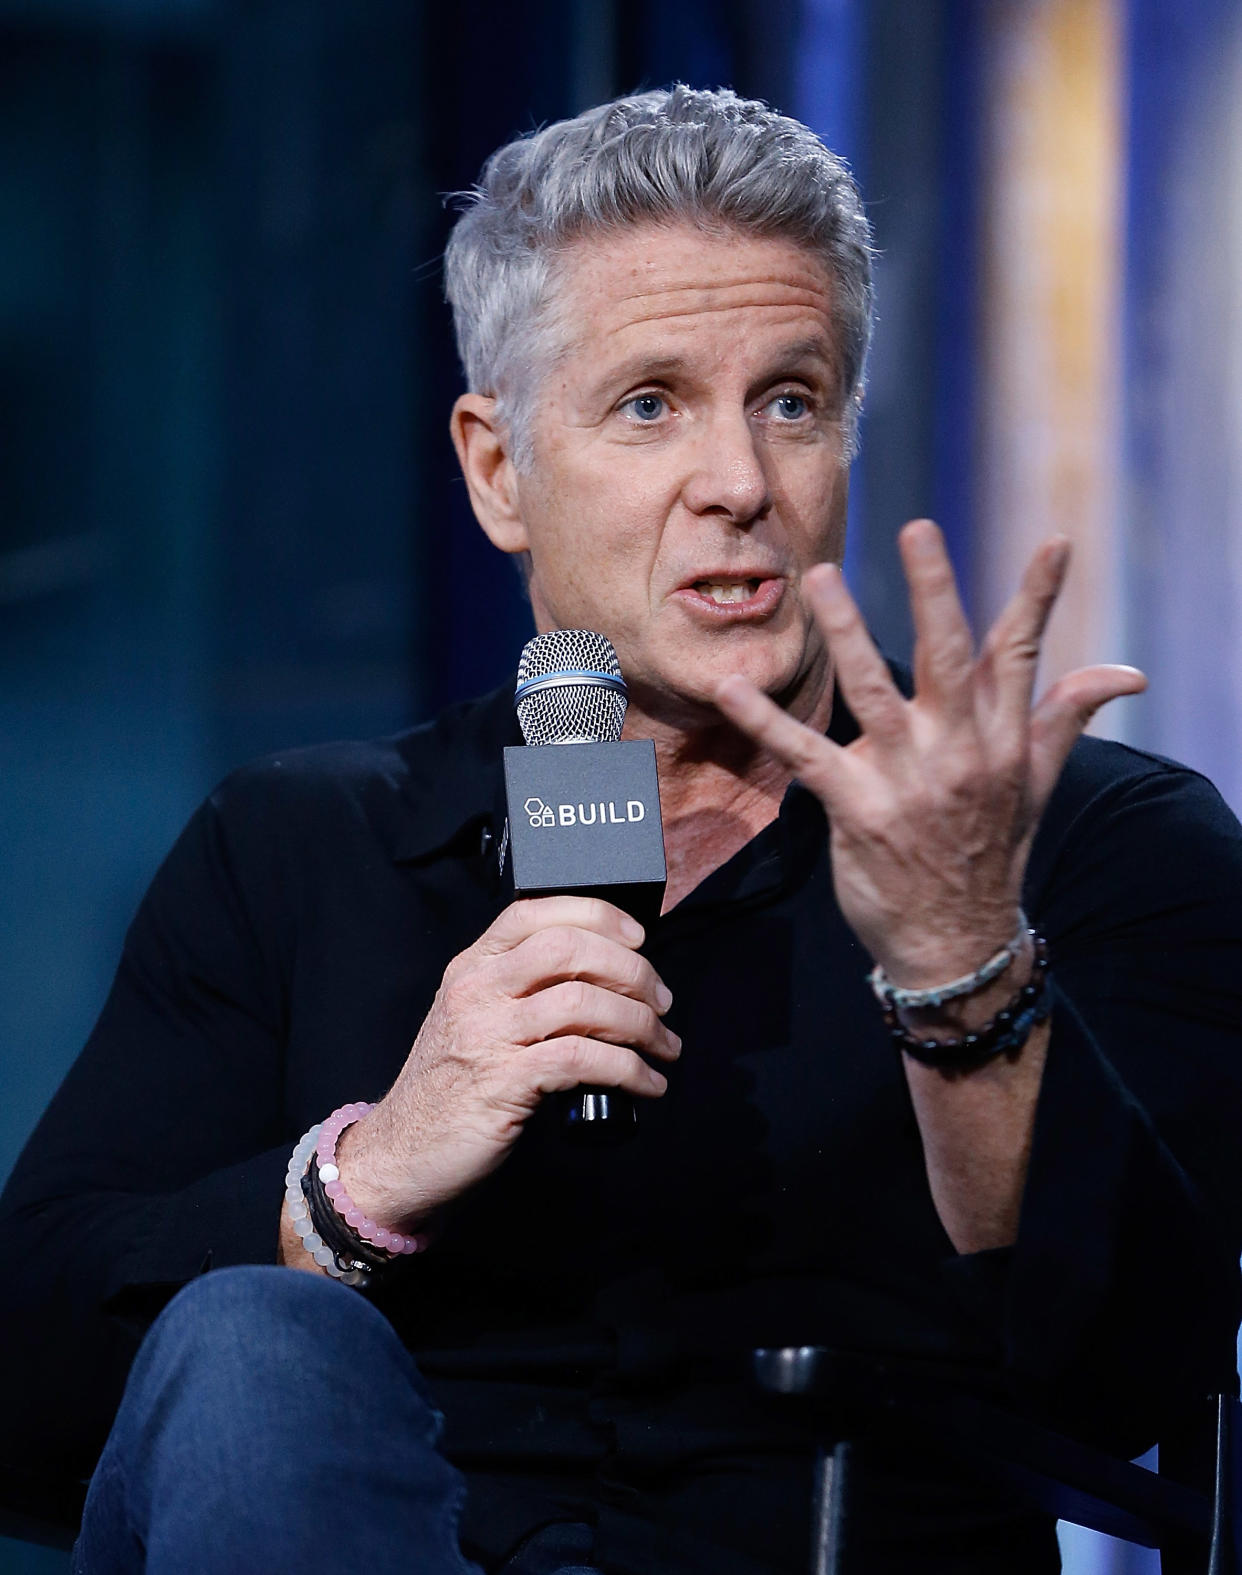 Donny Deutsch said he doesn't think Elizabeth Warren can beat Donald Trump — and people aren't happy with his assessment. (Photo: Getty Images)